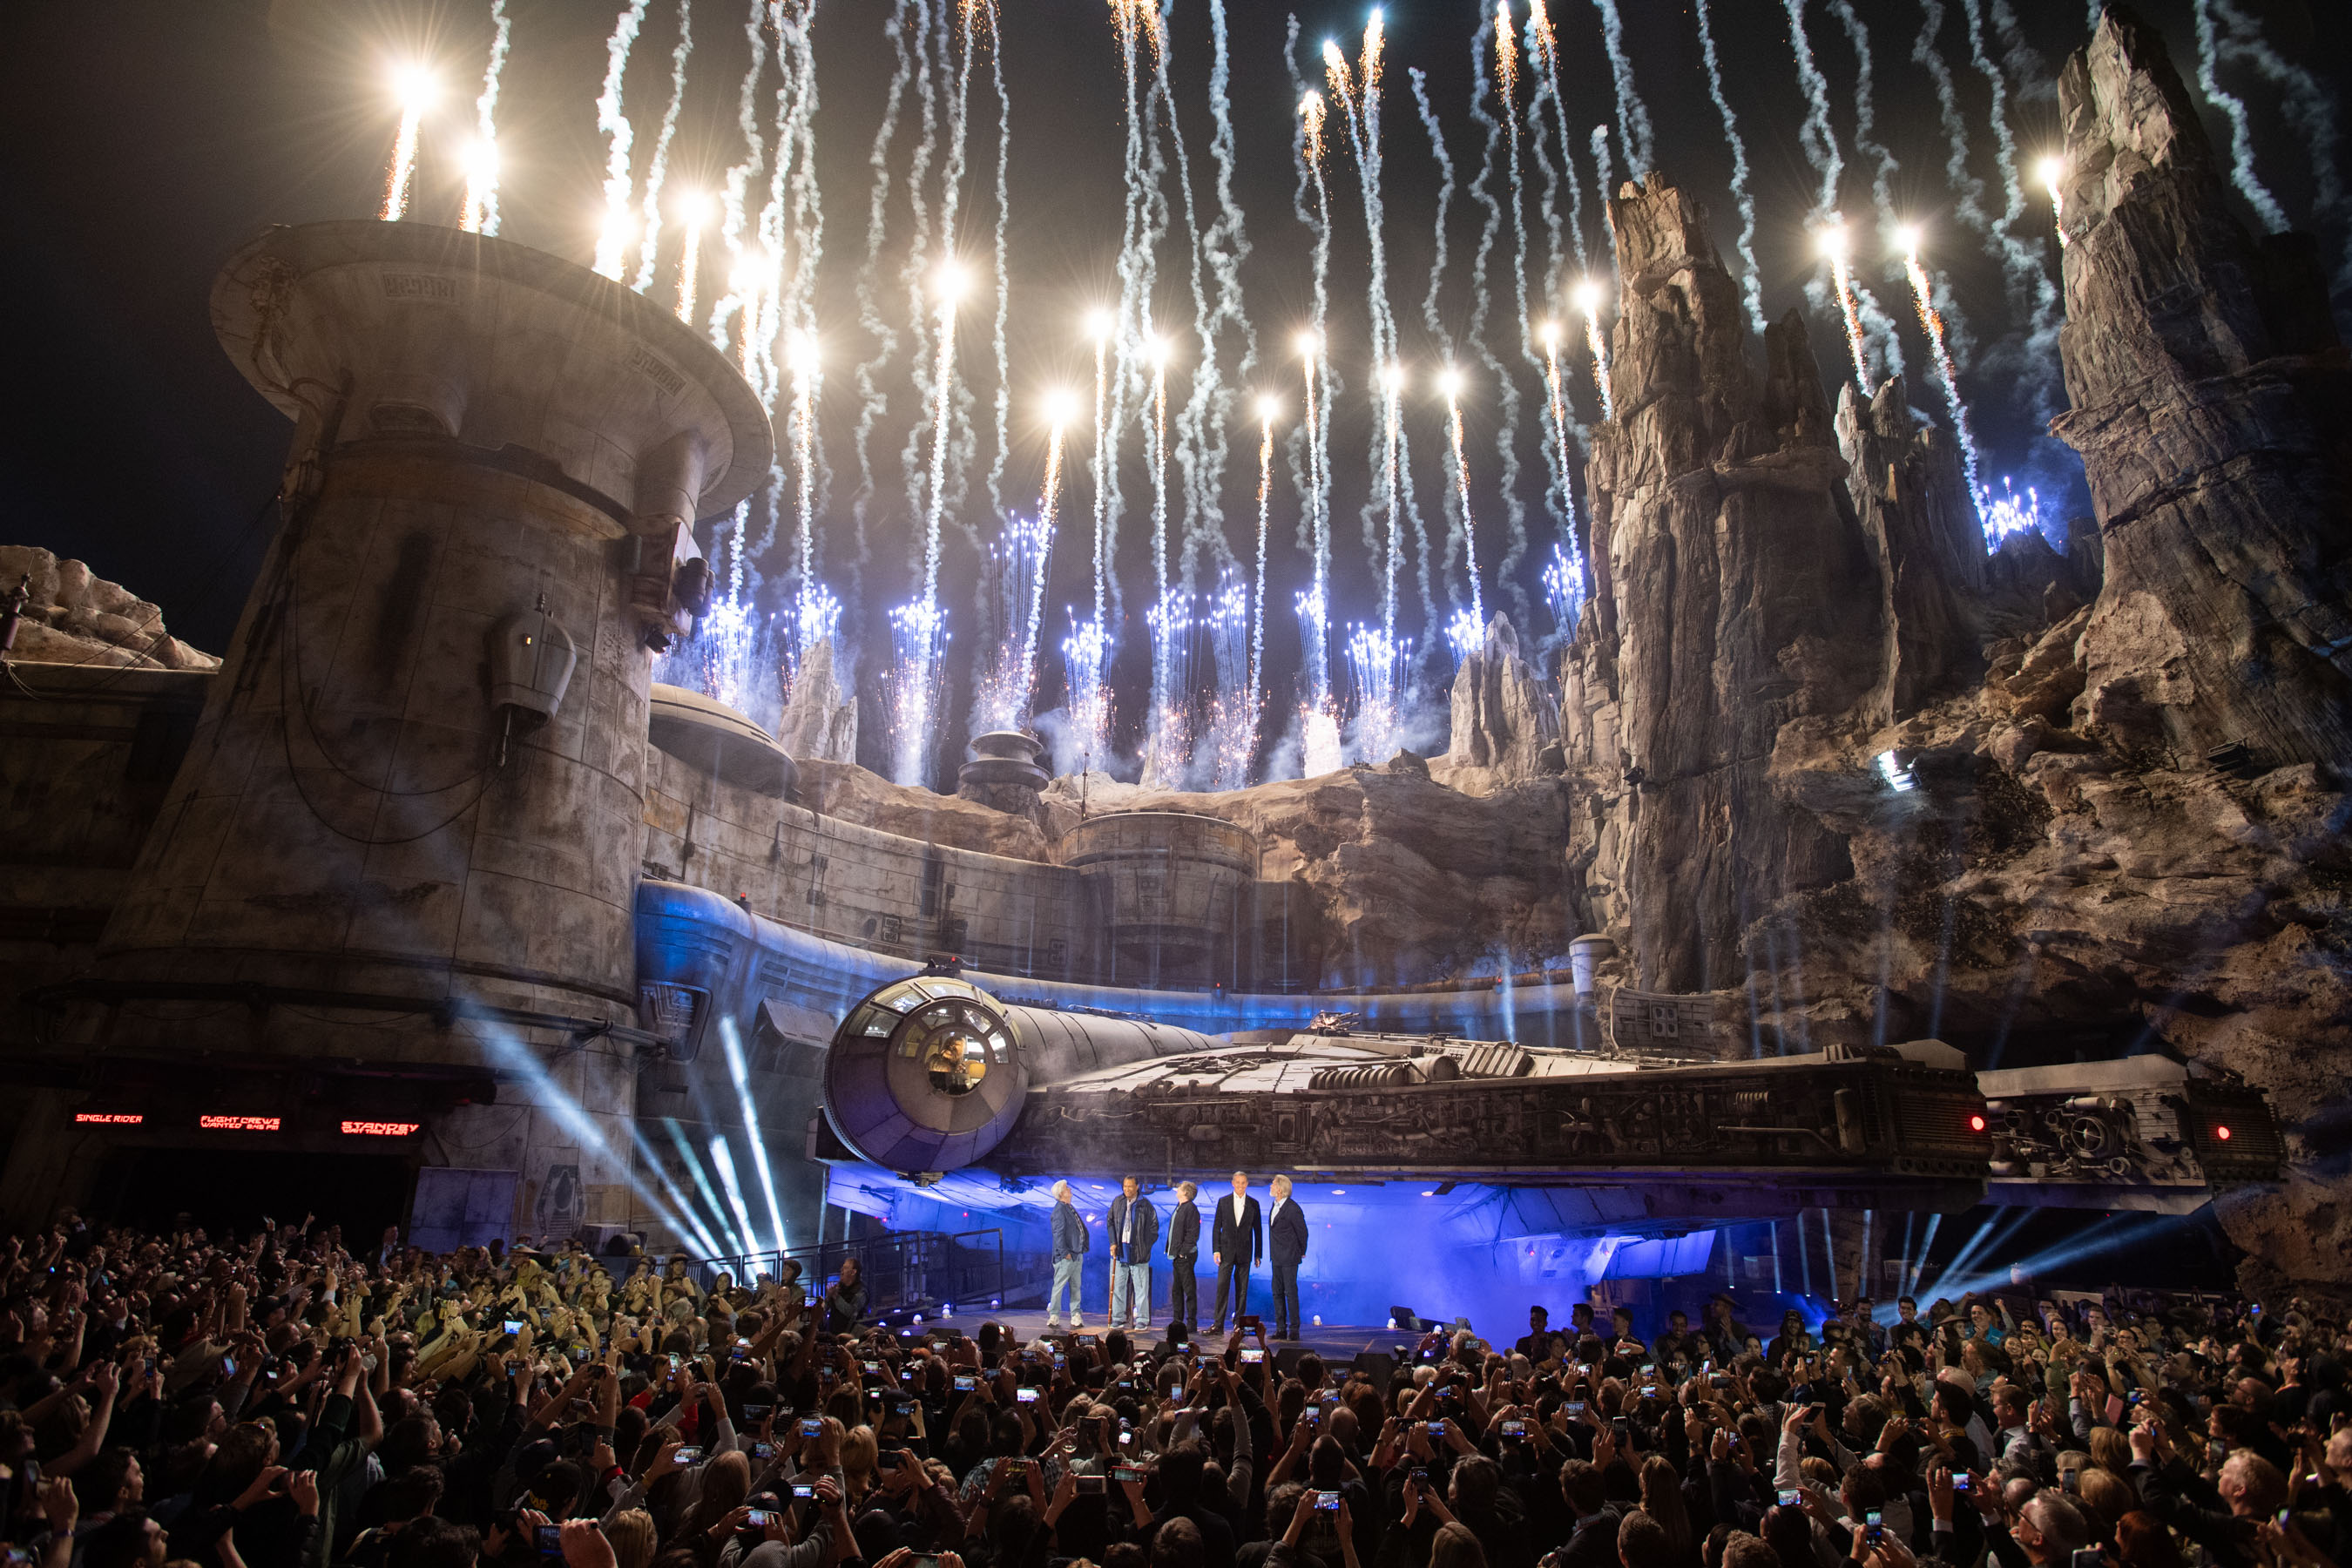 Star Wars: Galaxy’s Edge at Disneyland Park in Anaheim, California, lights up with galactic fanfare, May 29, 2019, as Star Wars creator George Lucas and actors Billy Dee Williams and Mark Hamill, Walt Disney Company Chairman and CEO Bob Iger and actor Harrison Ford celebrate the opening Disney’s largest single-themed land expansion ever. Star Wars: Galaxy’s Edge opens May 31, 2019, at Disneyland Resort in California and Aug. 29, 2019, at Walt Disney World Resort in Florida. ()Matt Petit/Disneyland Resort